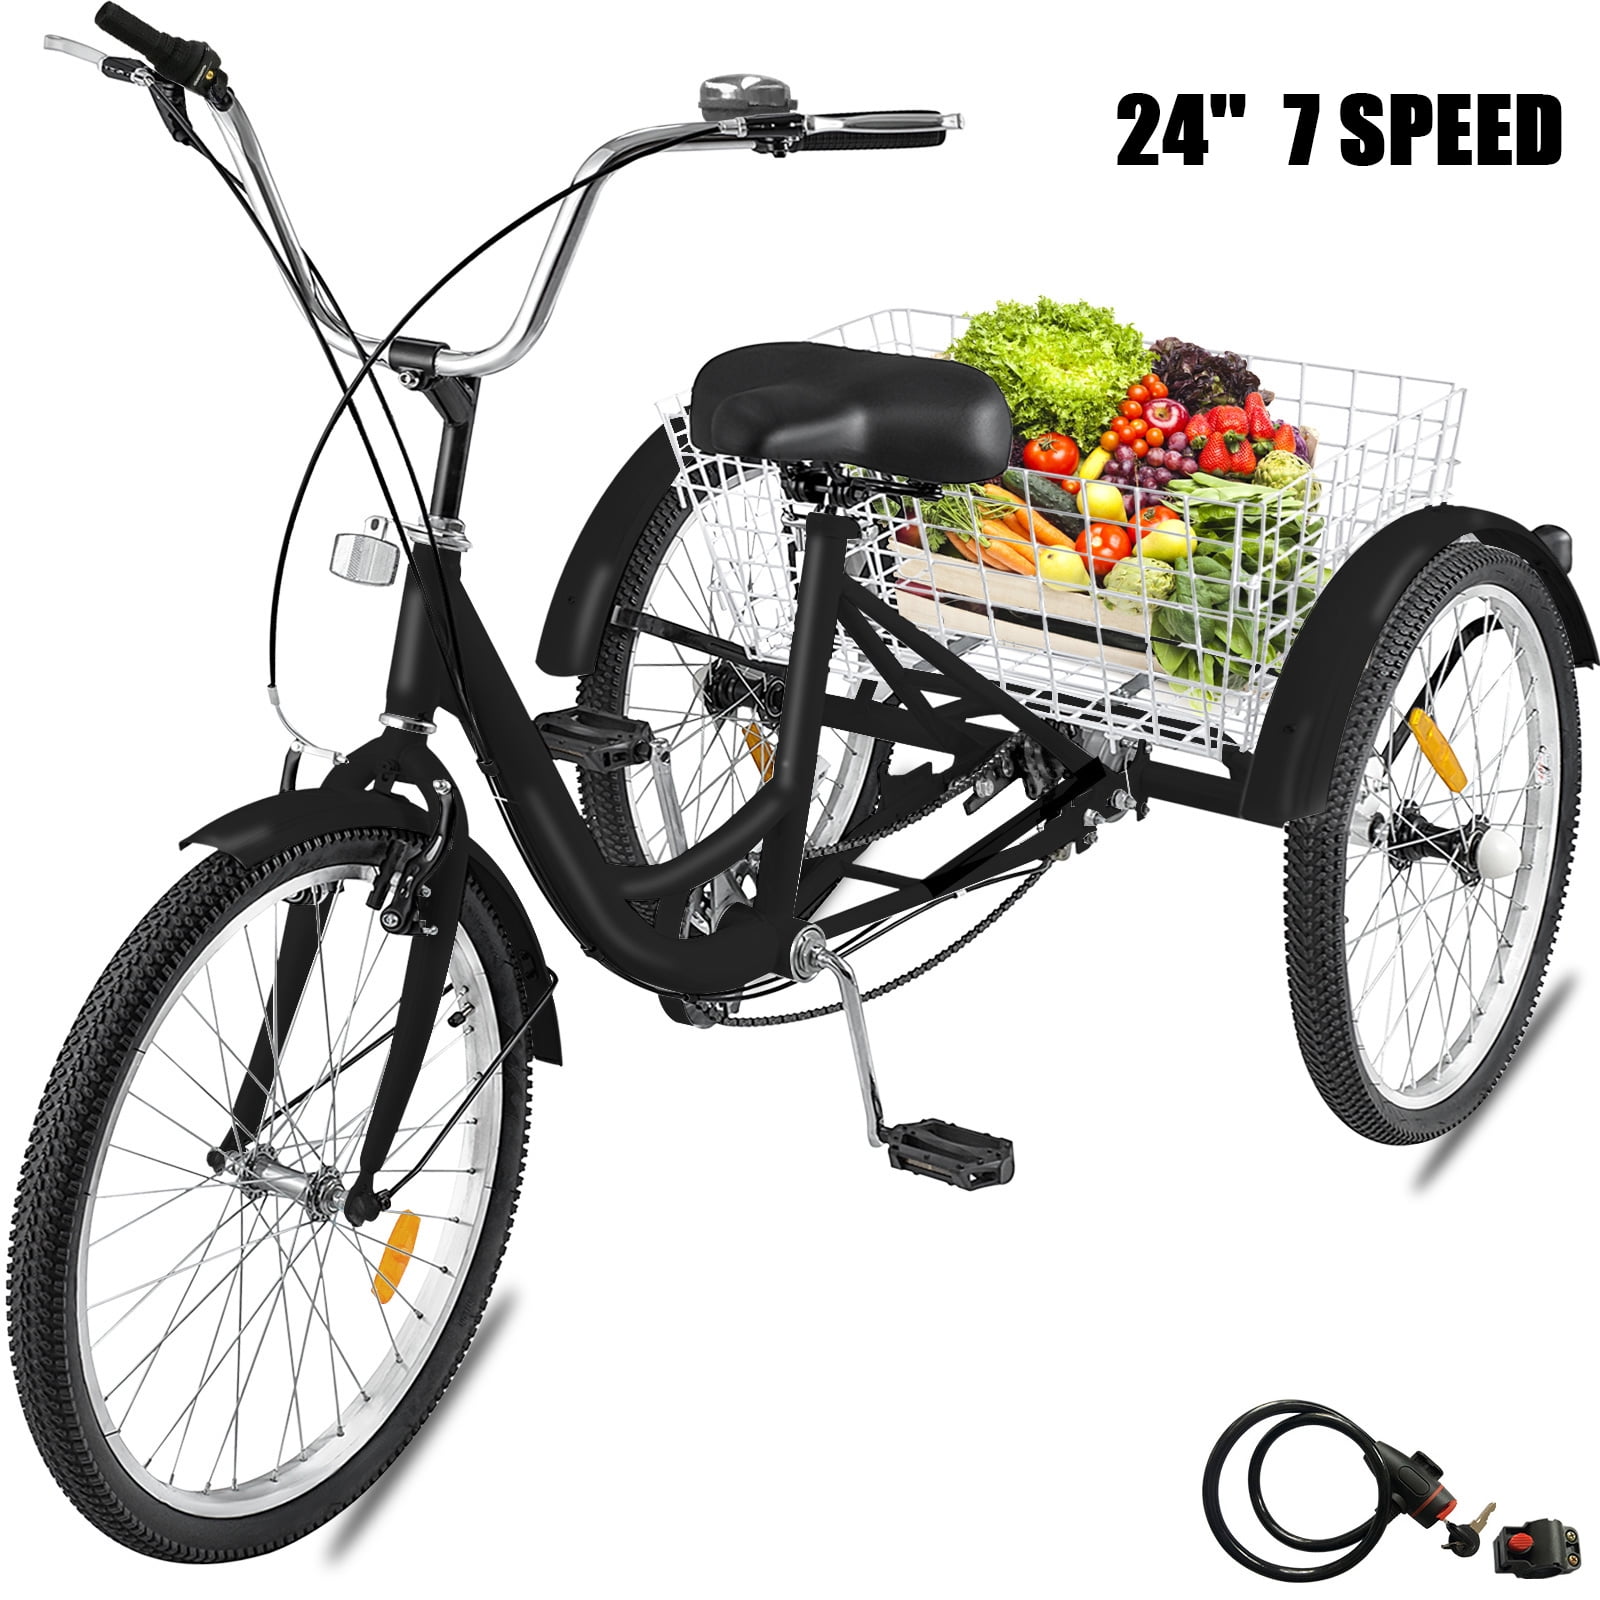 VEVOR 20 Inch Adult Tricycle Folding Style 3 Wheel Bike Adult Tricycle Trike Cruise Bike Large Size Basket for Recreation Shopping,Exercise Mens Womens BikeC